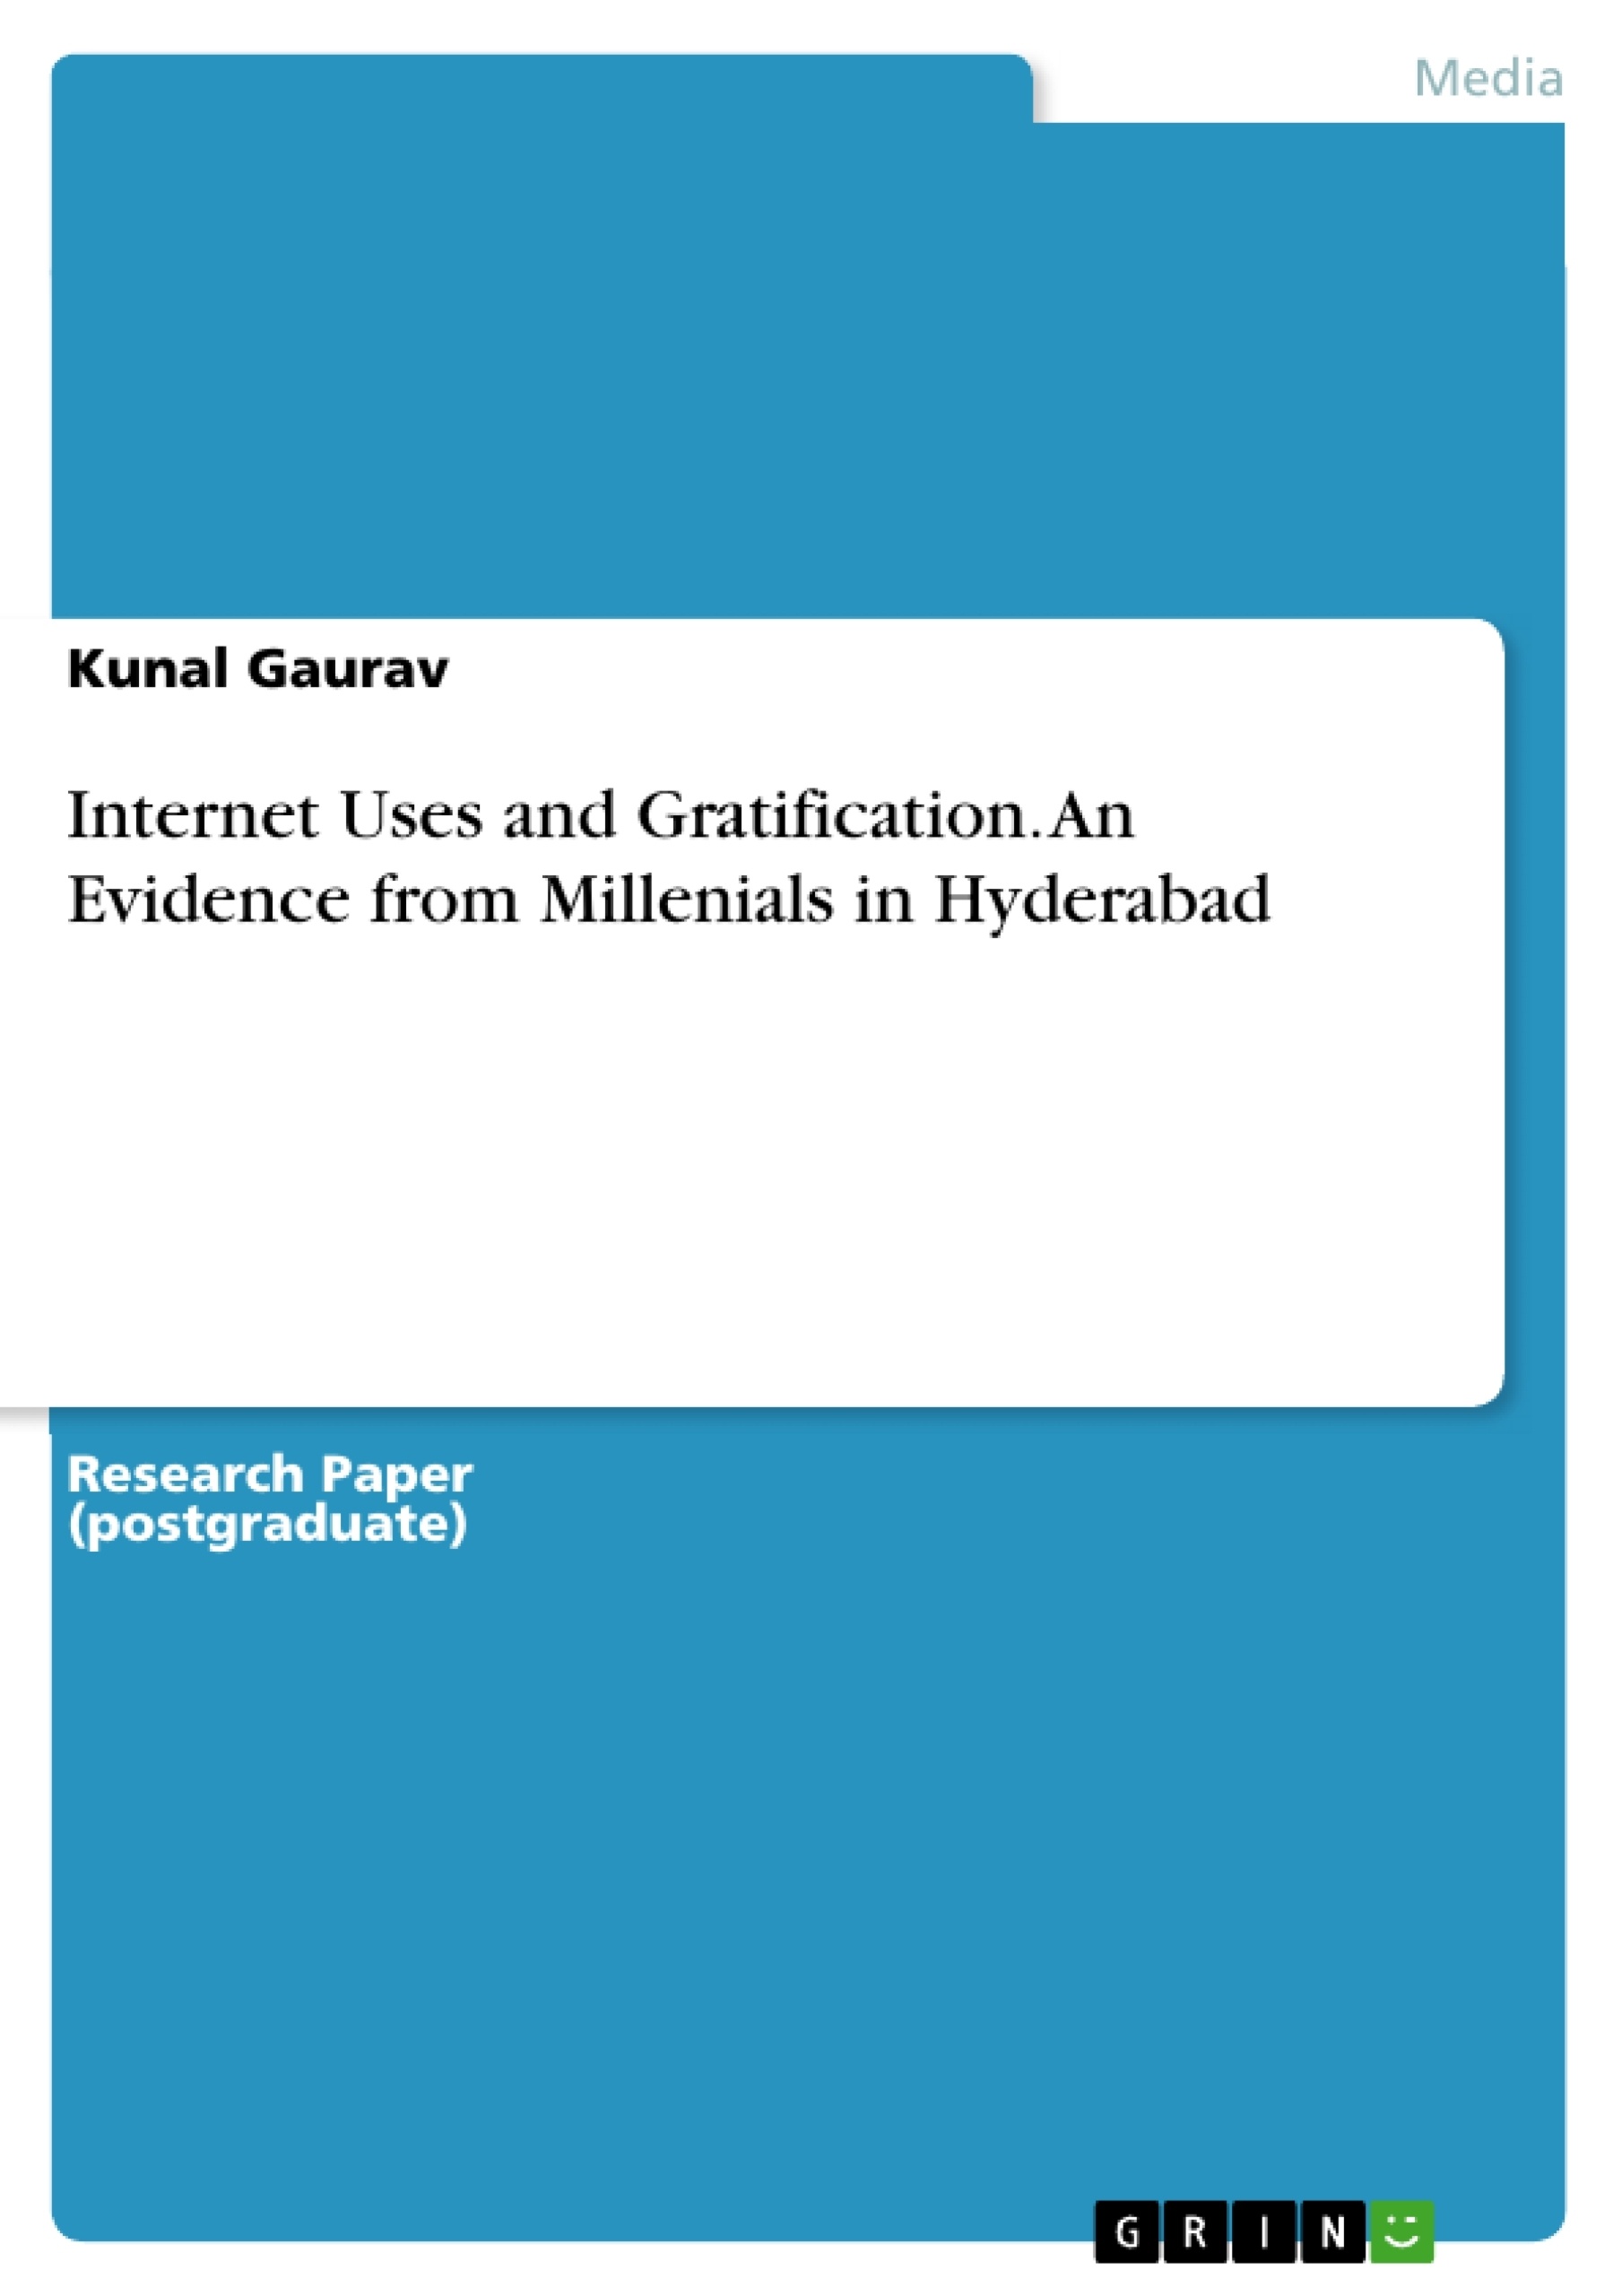 Título: Internet Uses and Gratification. An Evidence from Millenials in Hyderabad